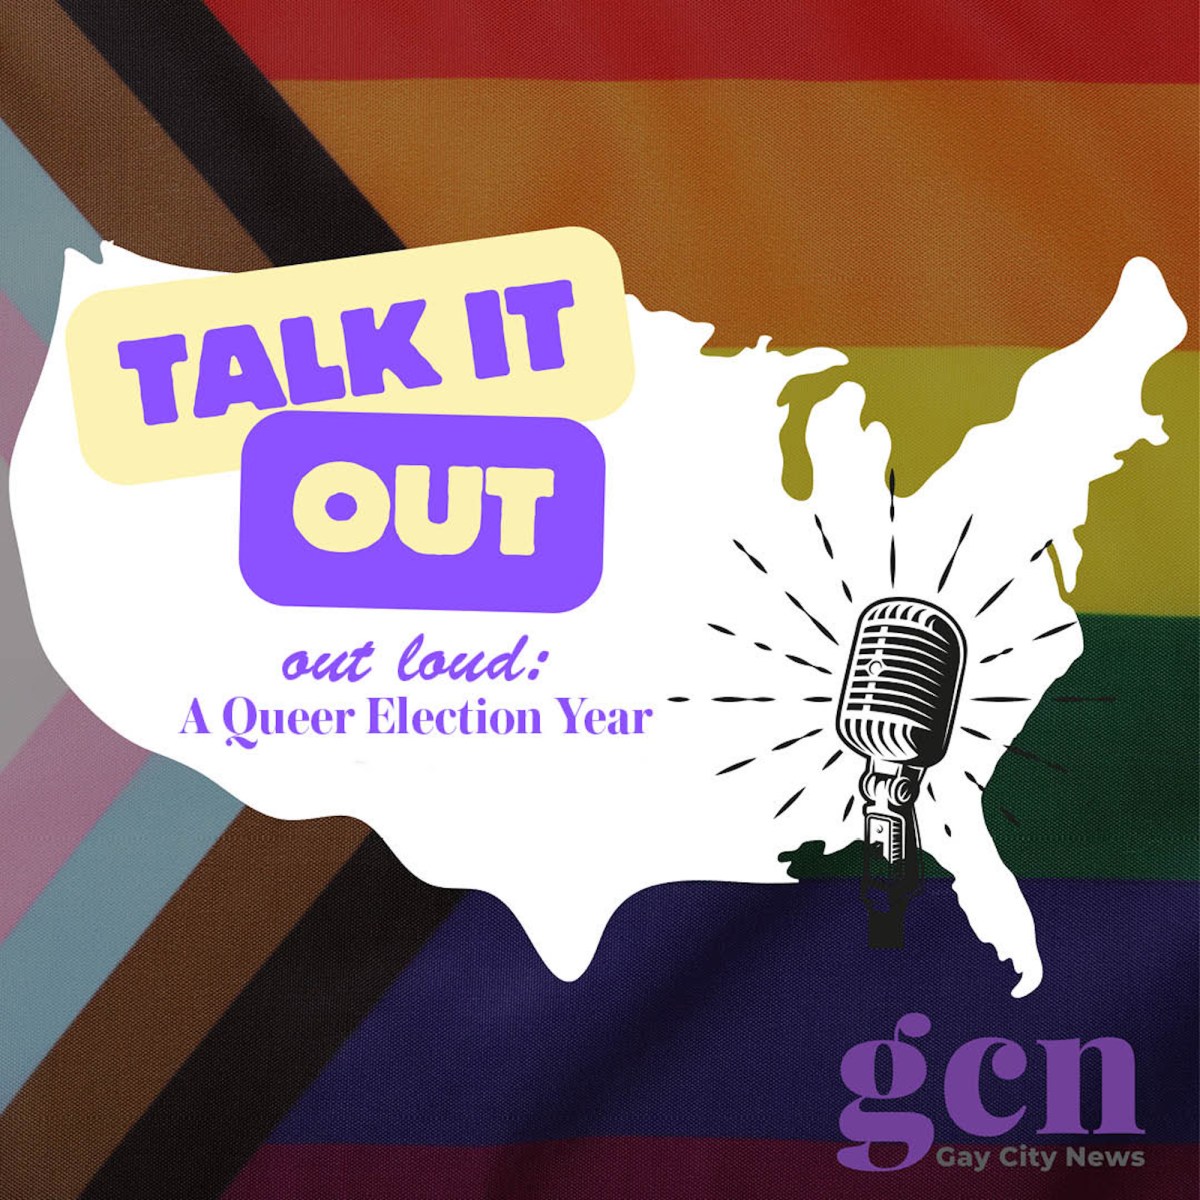 “Talk It OUT: LGBTQ Voices In A Queer Election Year" launches on Wed., May 29.